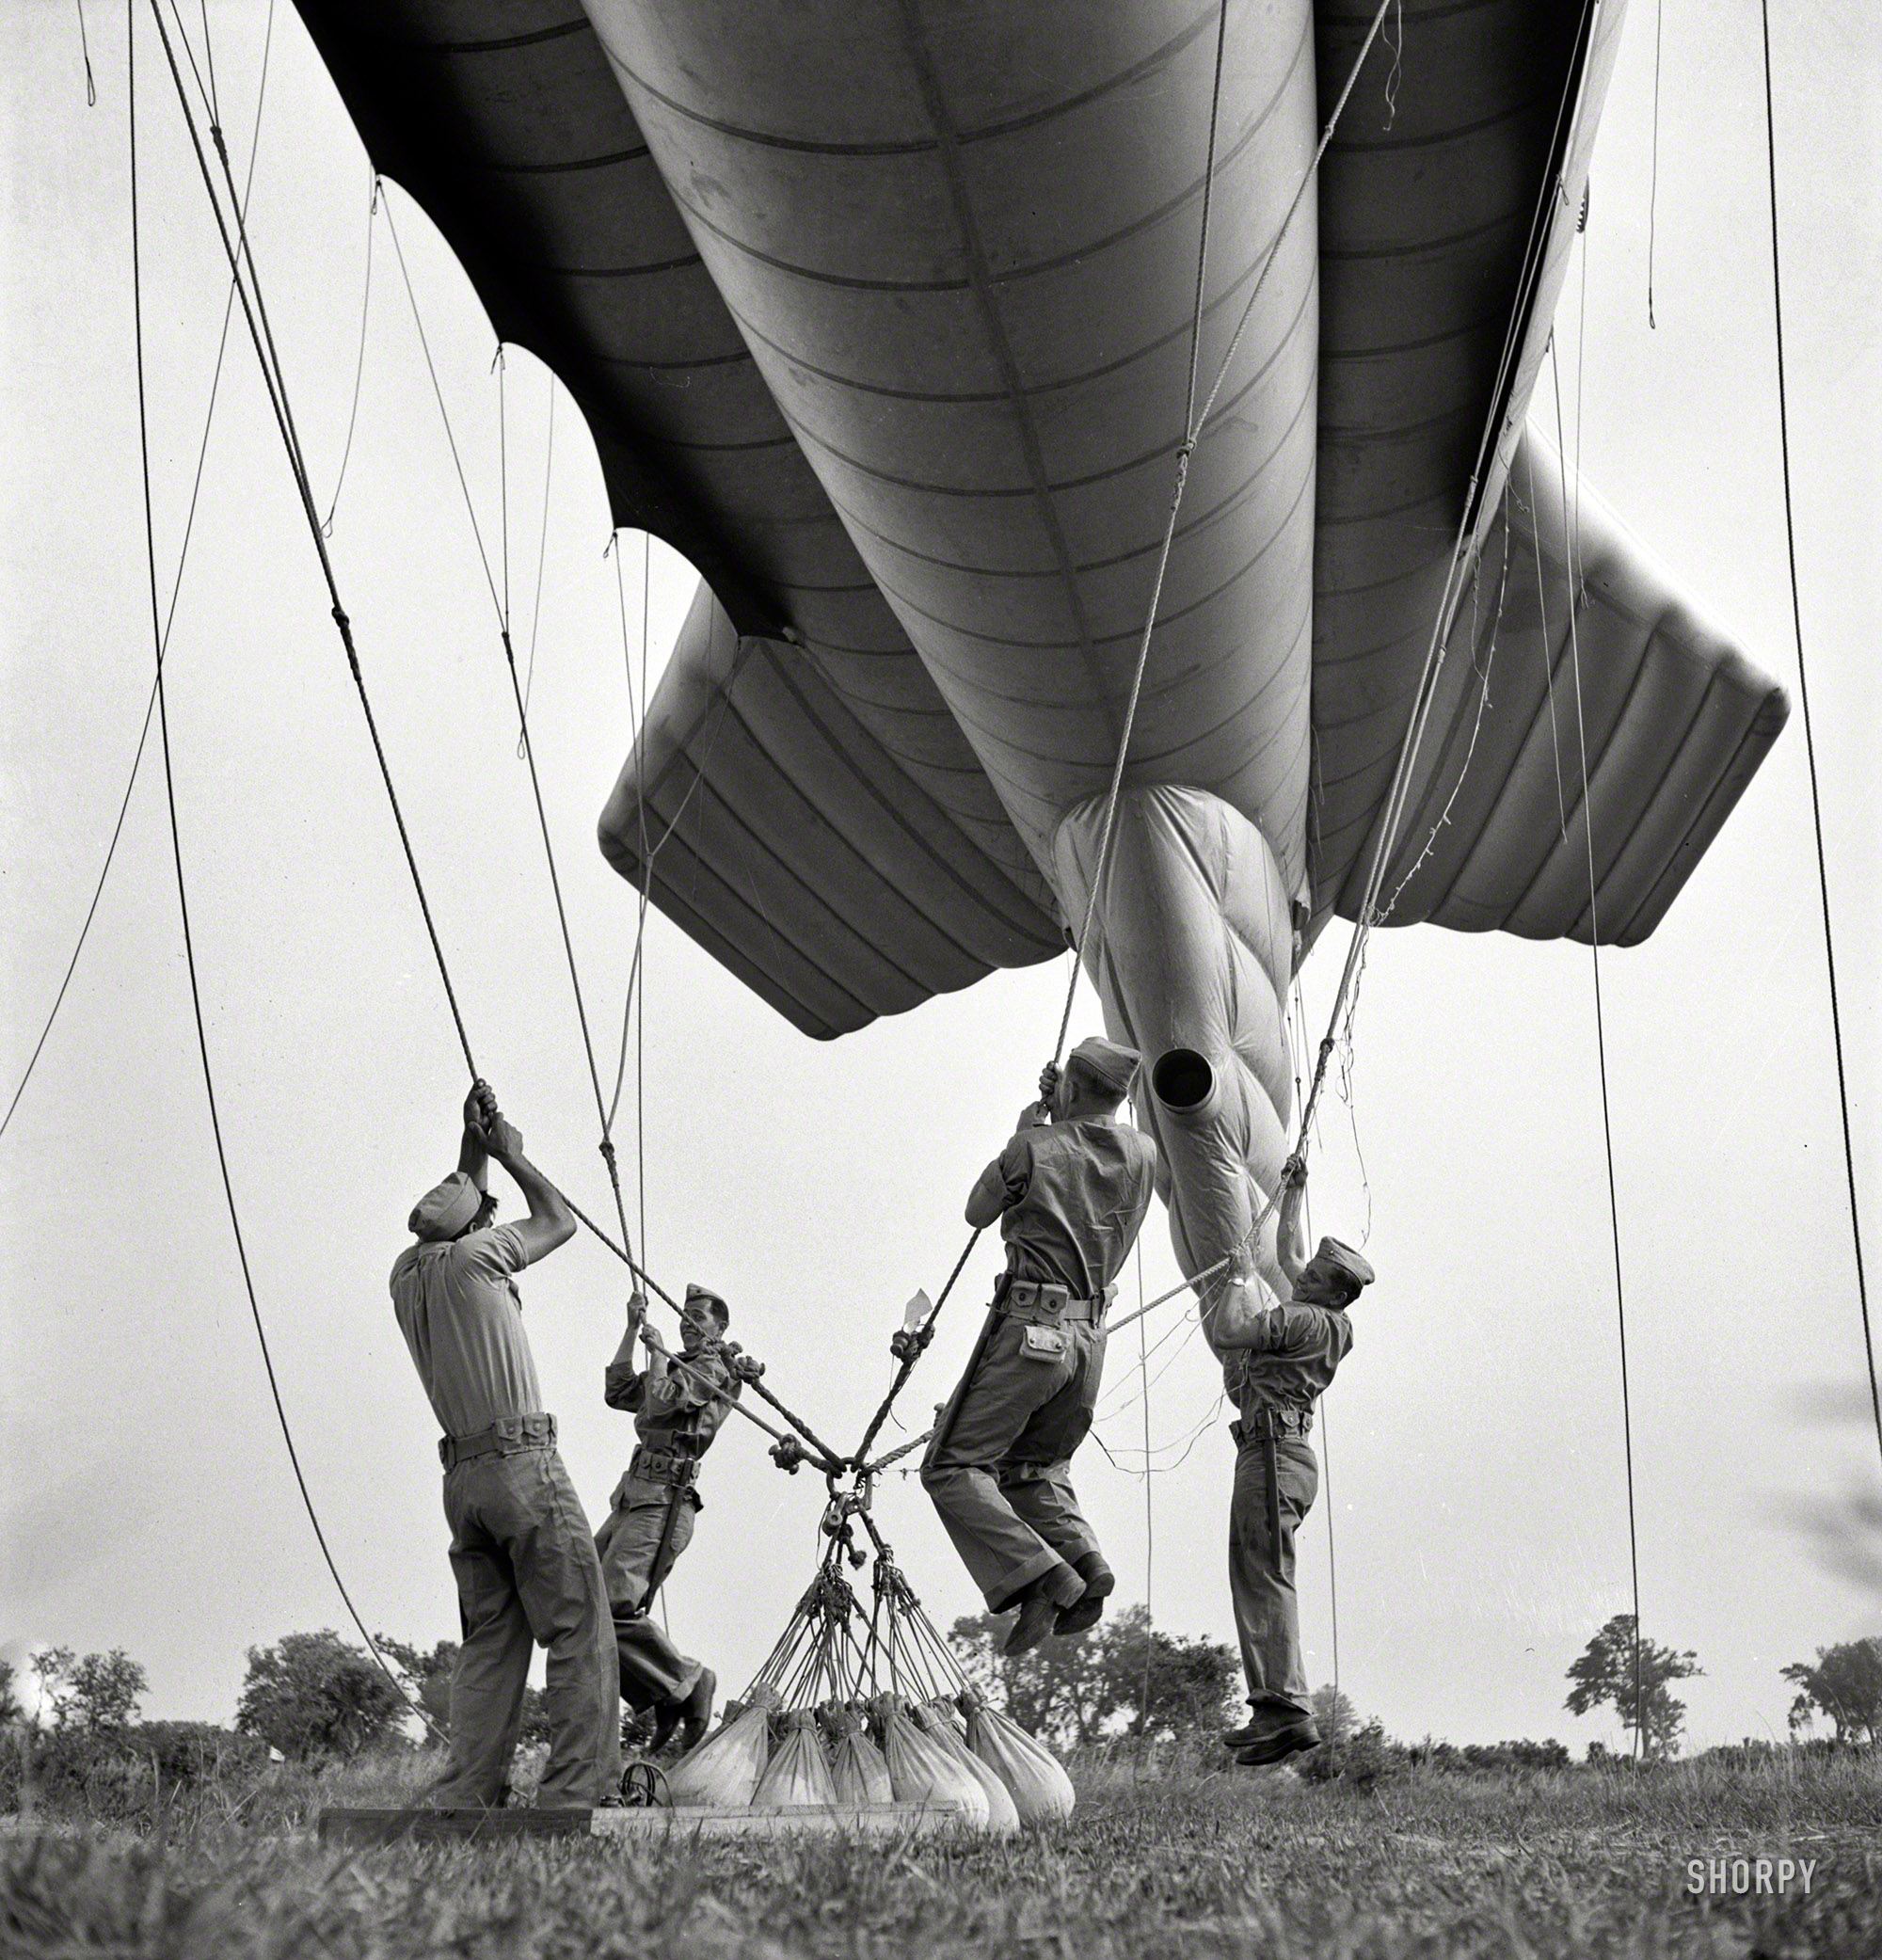 May 1942. Continuing the series last seen here. "Parris Island, South Carolina. Special Marine units learning how to bed down a big barrage balloon." Photos by Pat Terry and Alfred Palmer for the Office of War Information. View full size.